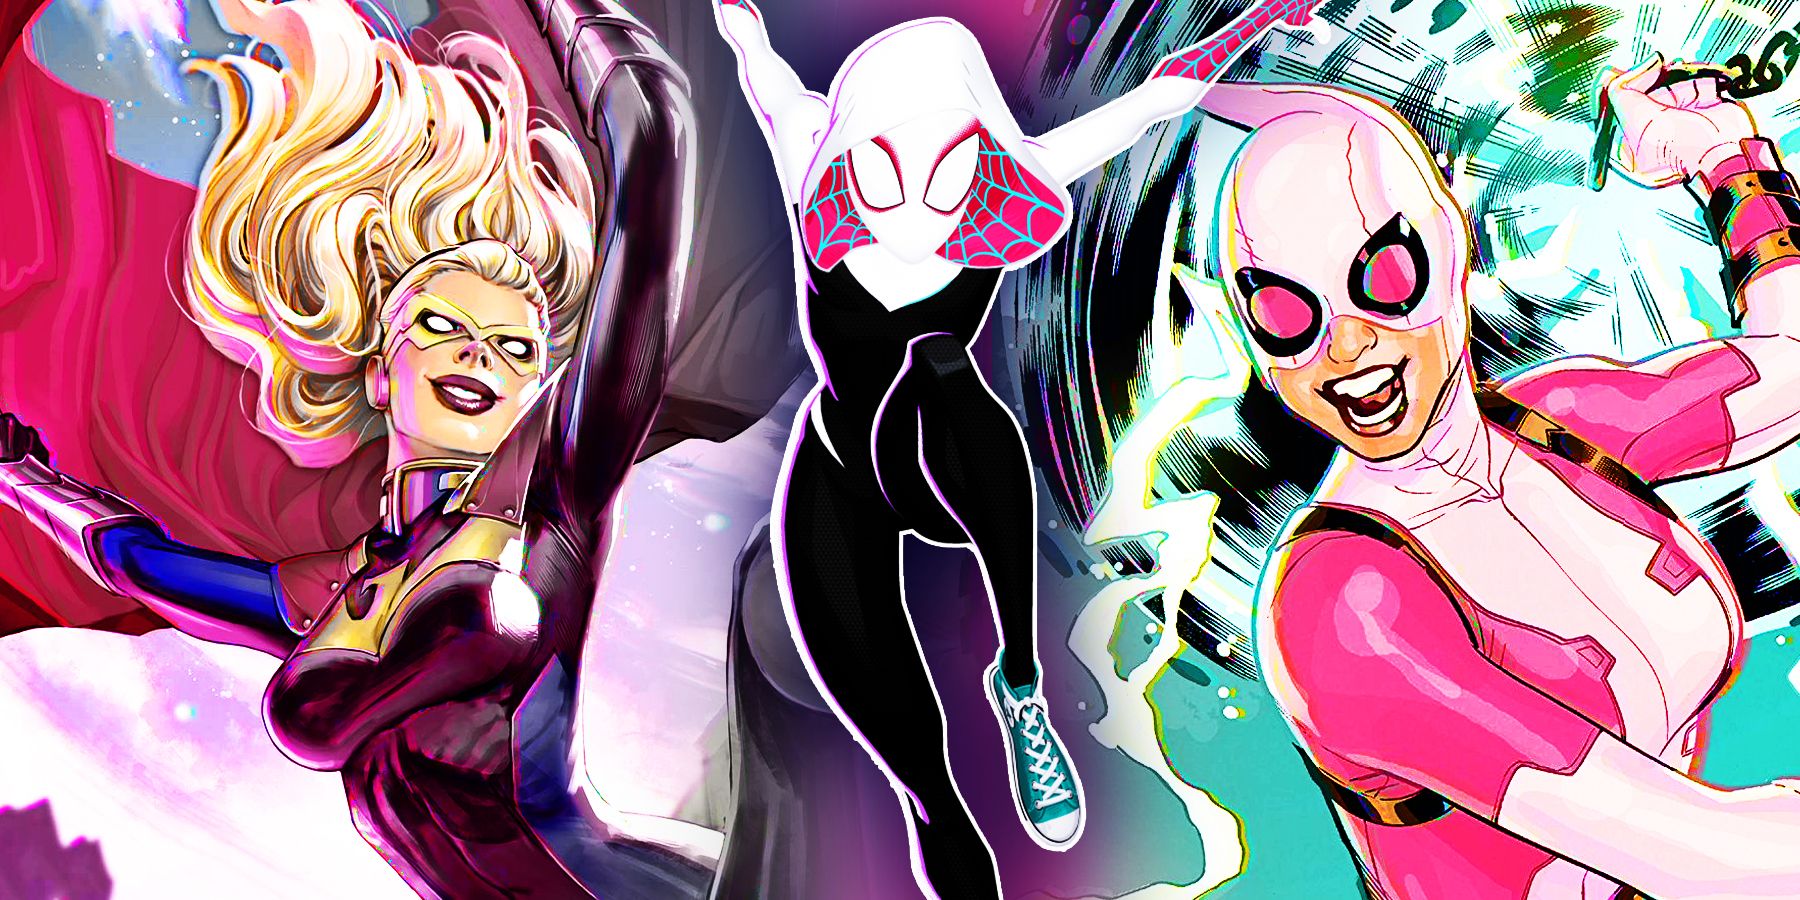 Spider-Gwen: Emma Stone Shocked That Fans Want Her Back as Marvel Superhero